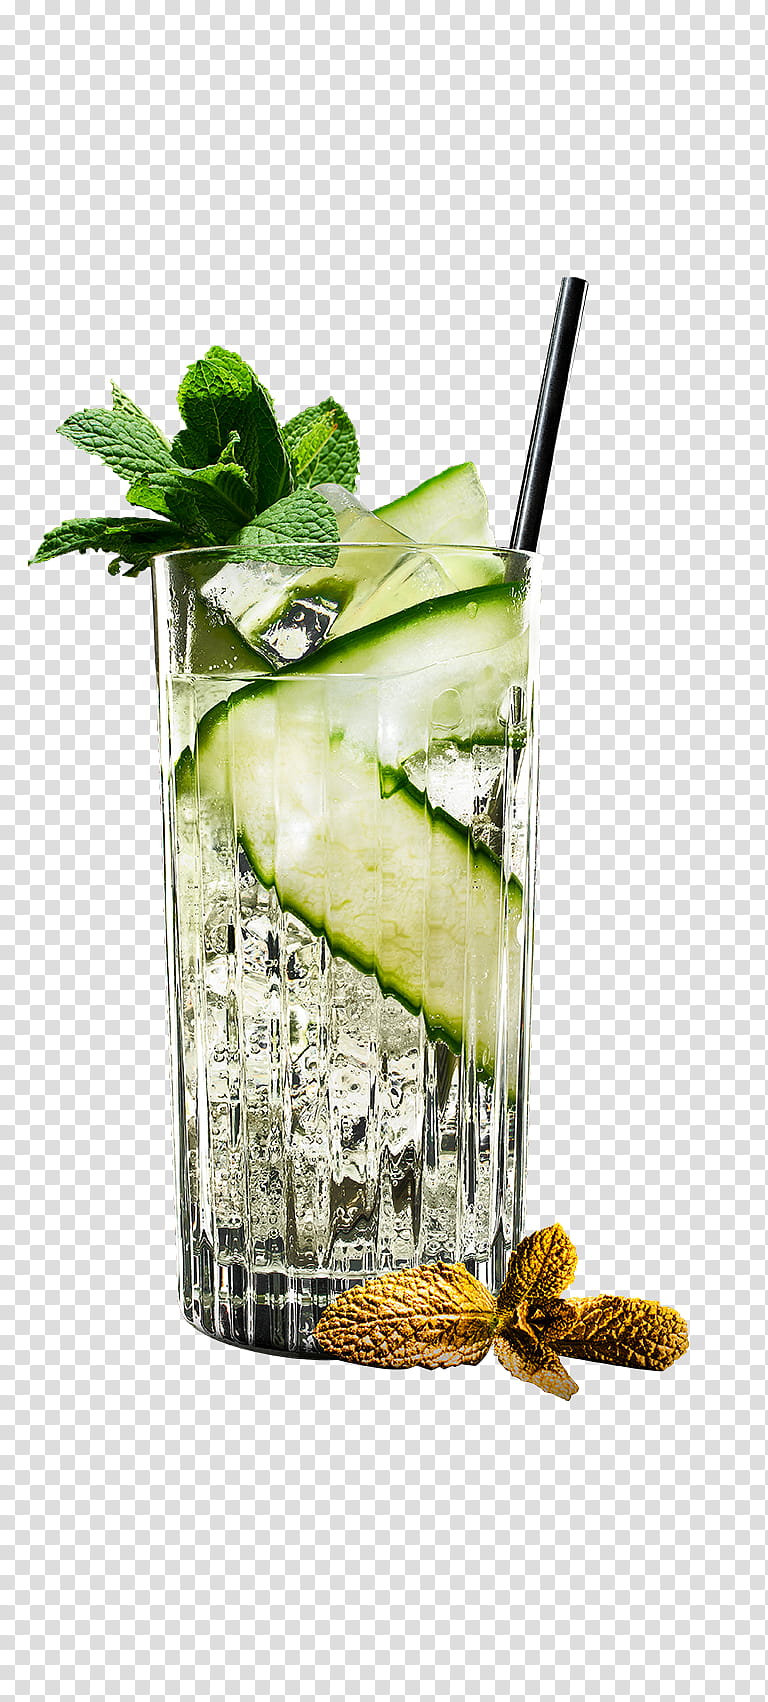 Water, Mojito, Cocktail Garnish, Gin And Tonic, Caipirinha, Rum And Coke, Mint Julep, Vodka Tonic transparent background PNG clipart